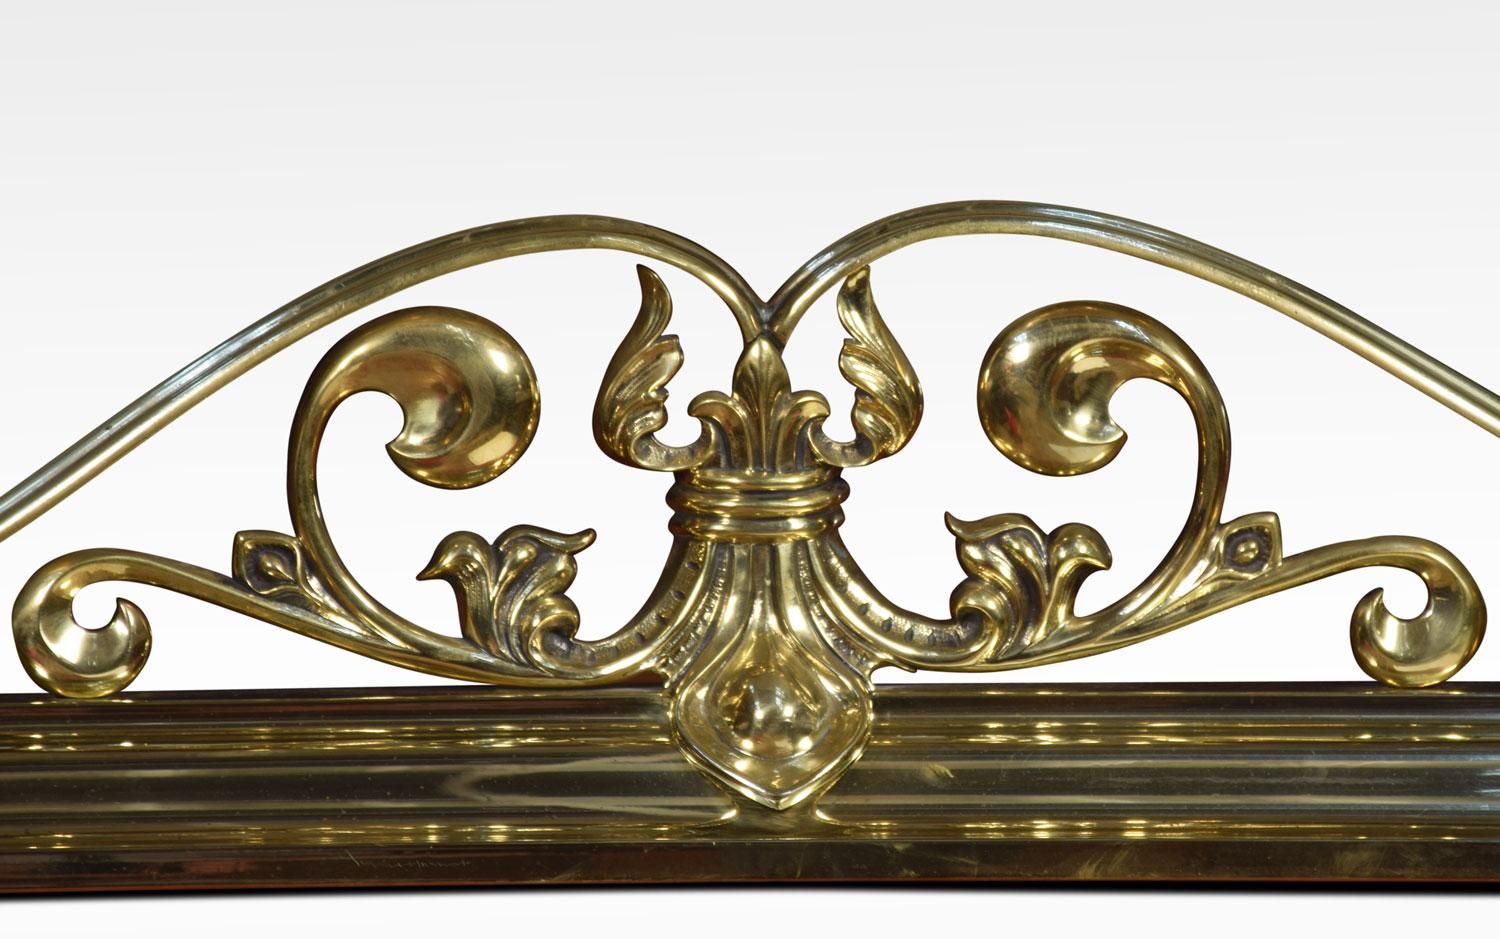 Brass fender, with pierced scrolling foliate crest, flanked to either side by raised scrolling finials.
Dimensions:
Height 12.5 inches

External measurements
Length 61 inches
Depth 12.5 inches

Internal measurements
Length 55 inches
Depth